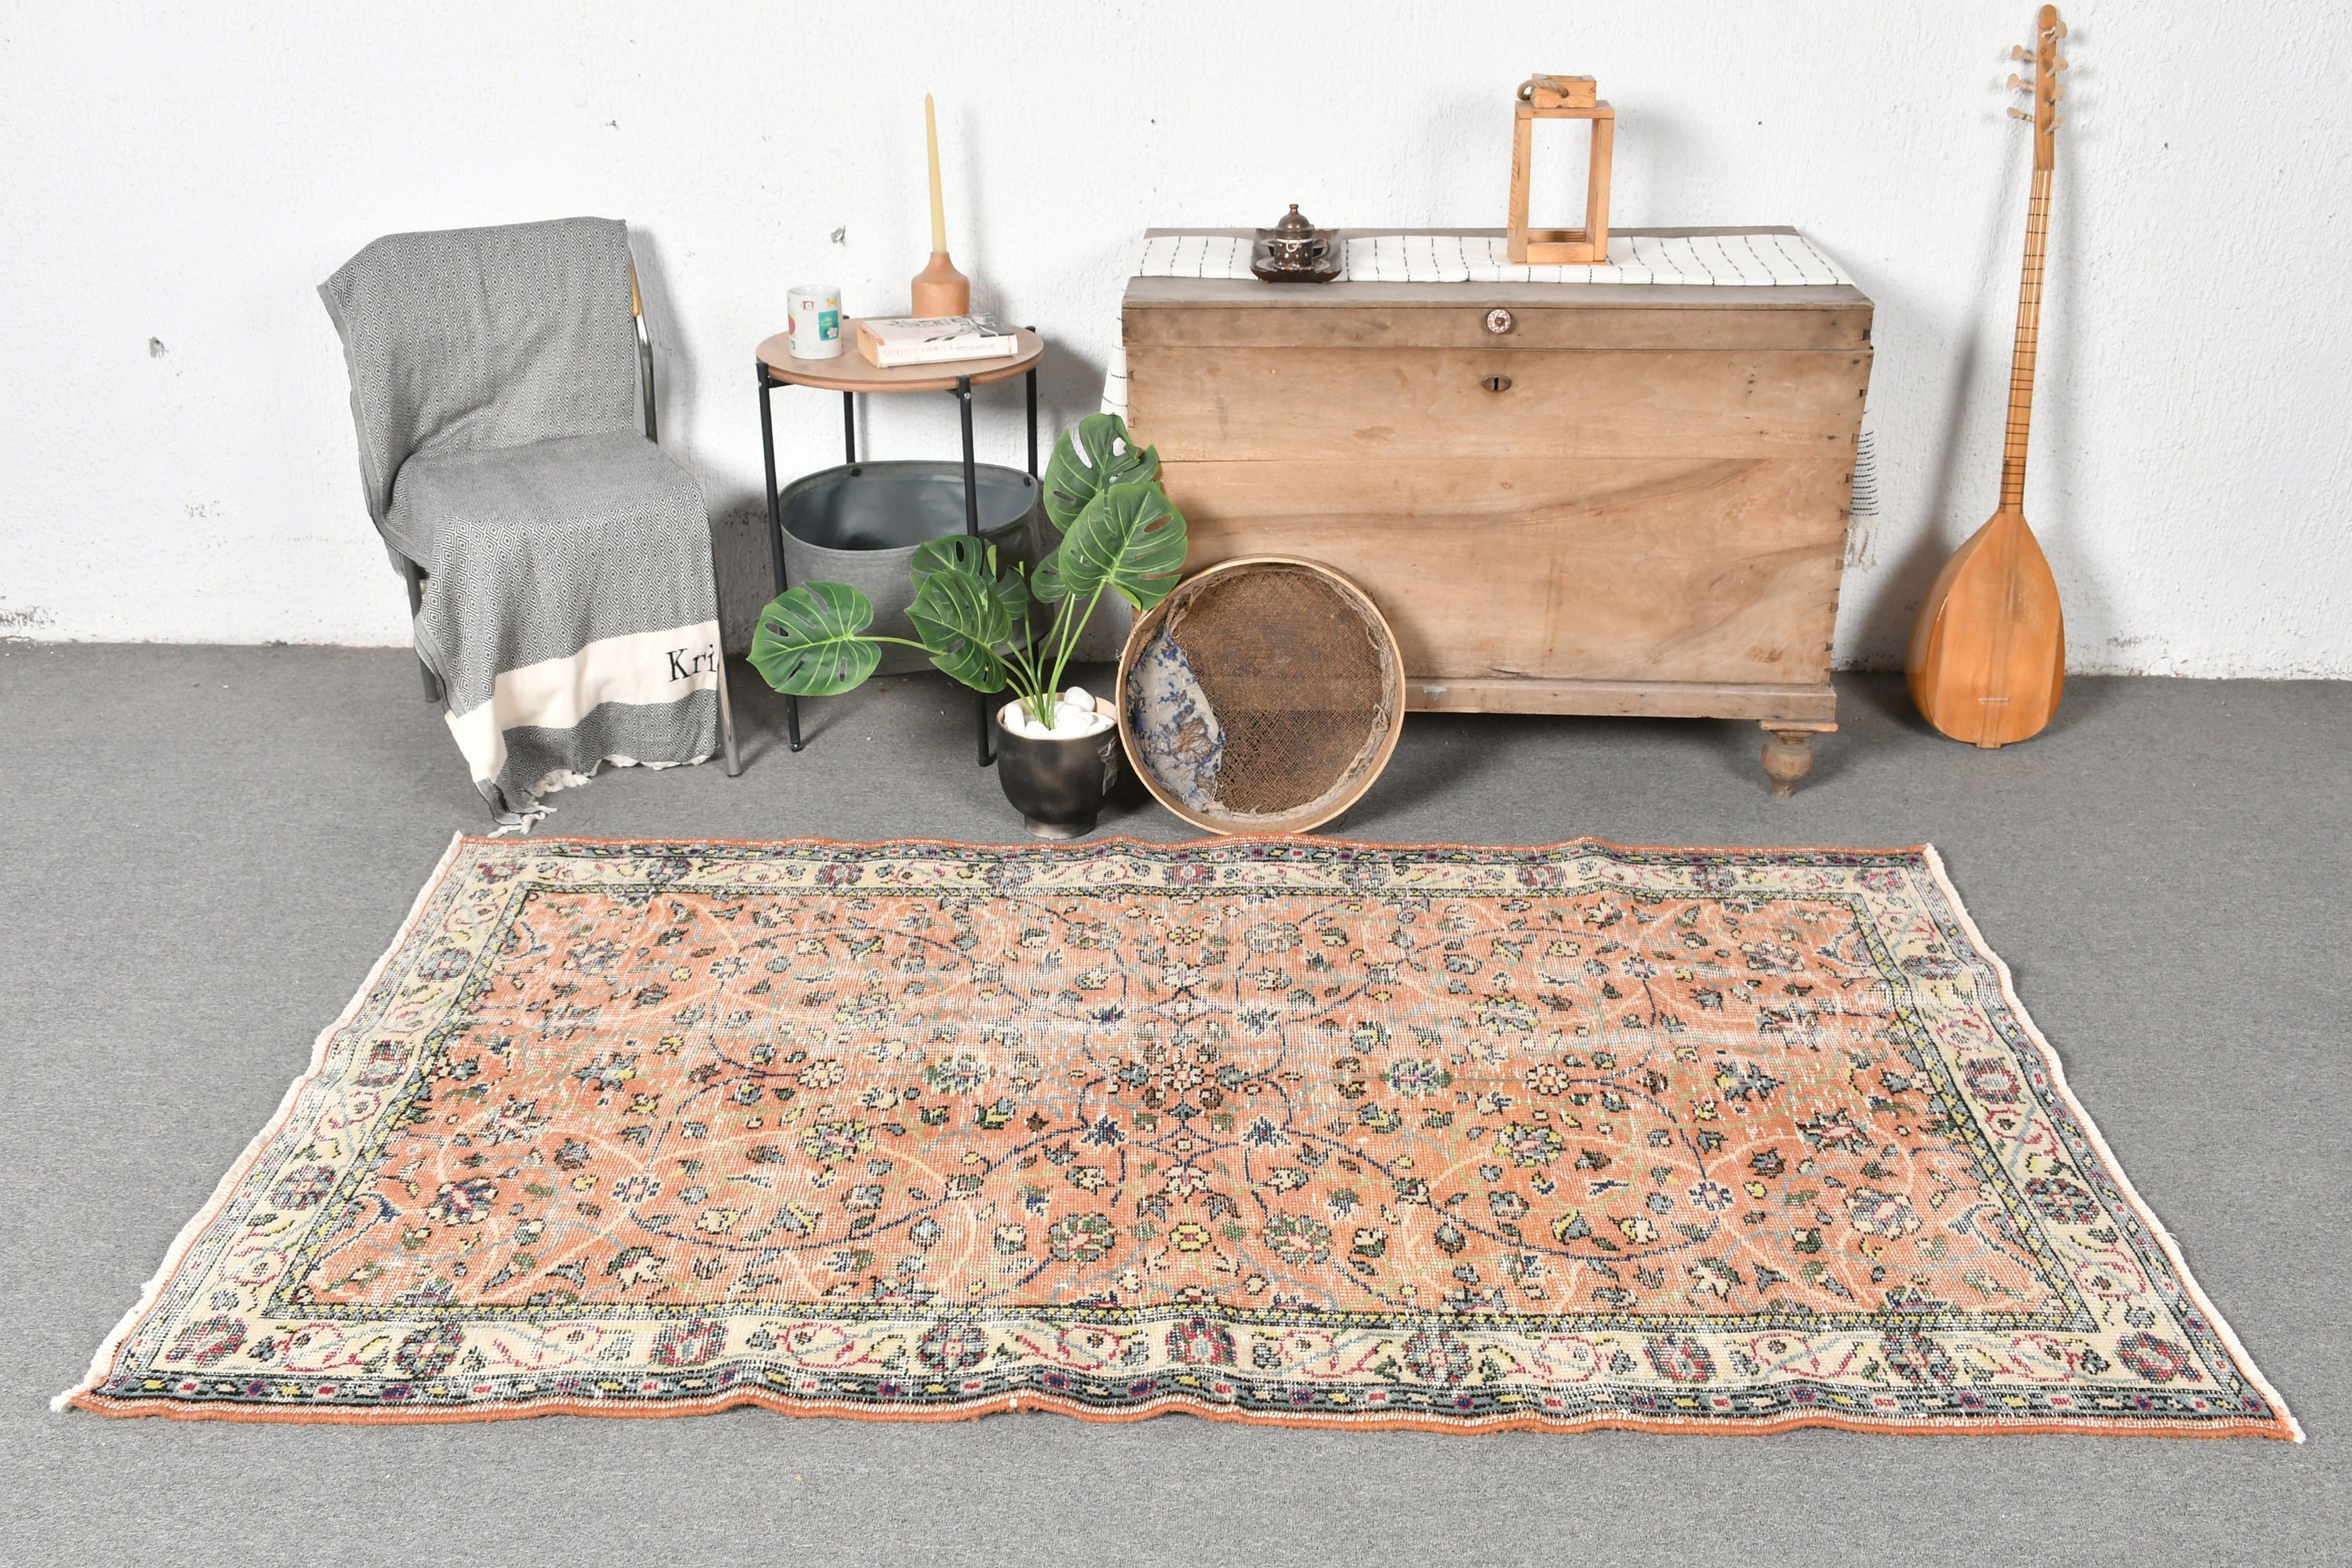 Floor Rug, Brown Antique Rug, Home Decor Rugs, Rugs for Kitchen, 3.9x6.7 ft Area Rugs, Indoor Rug, Vintage Rug, Turkish Rugs